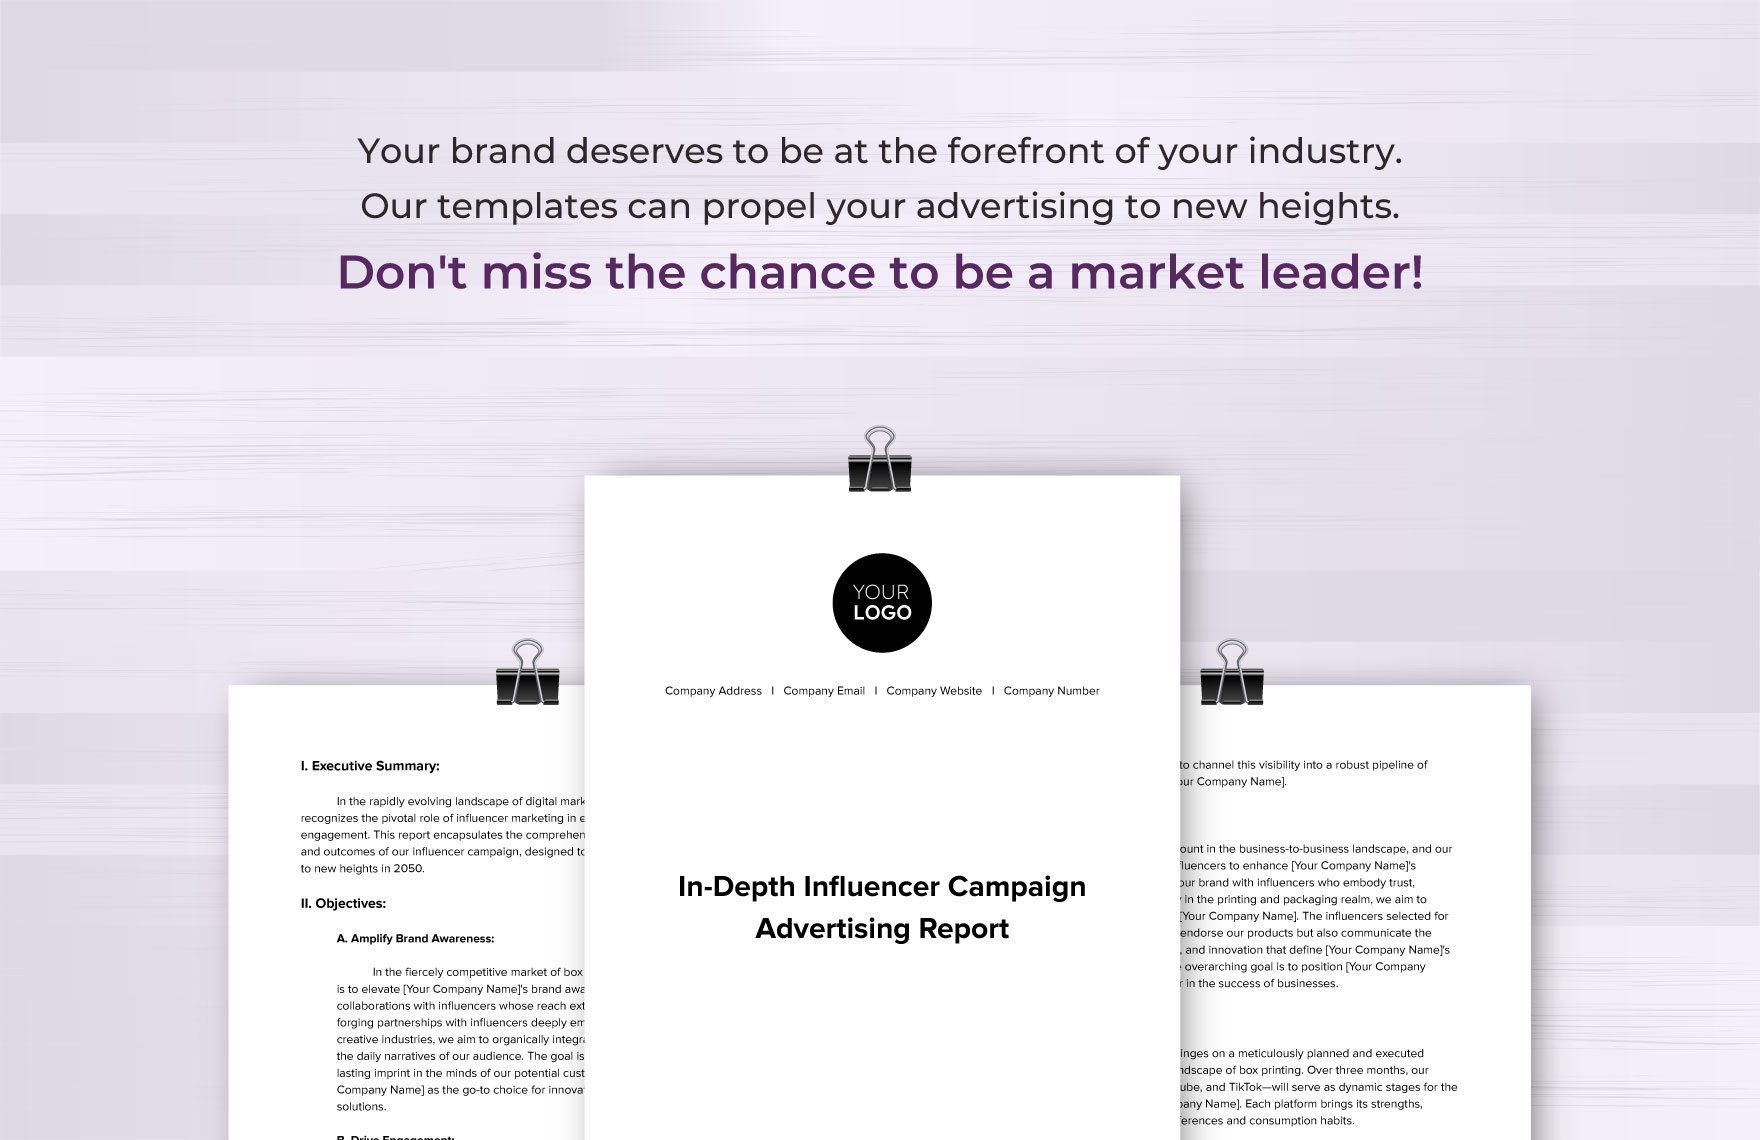 In-Depth Influencer Campaign Advertising Report Template